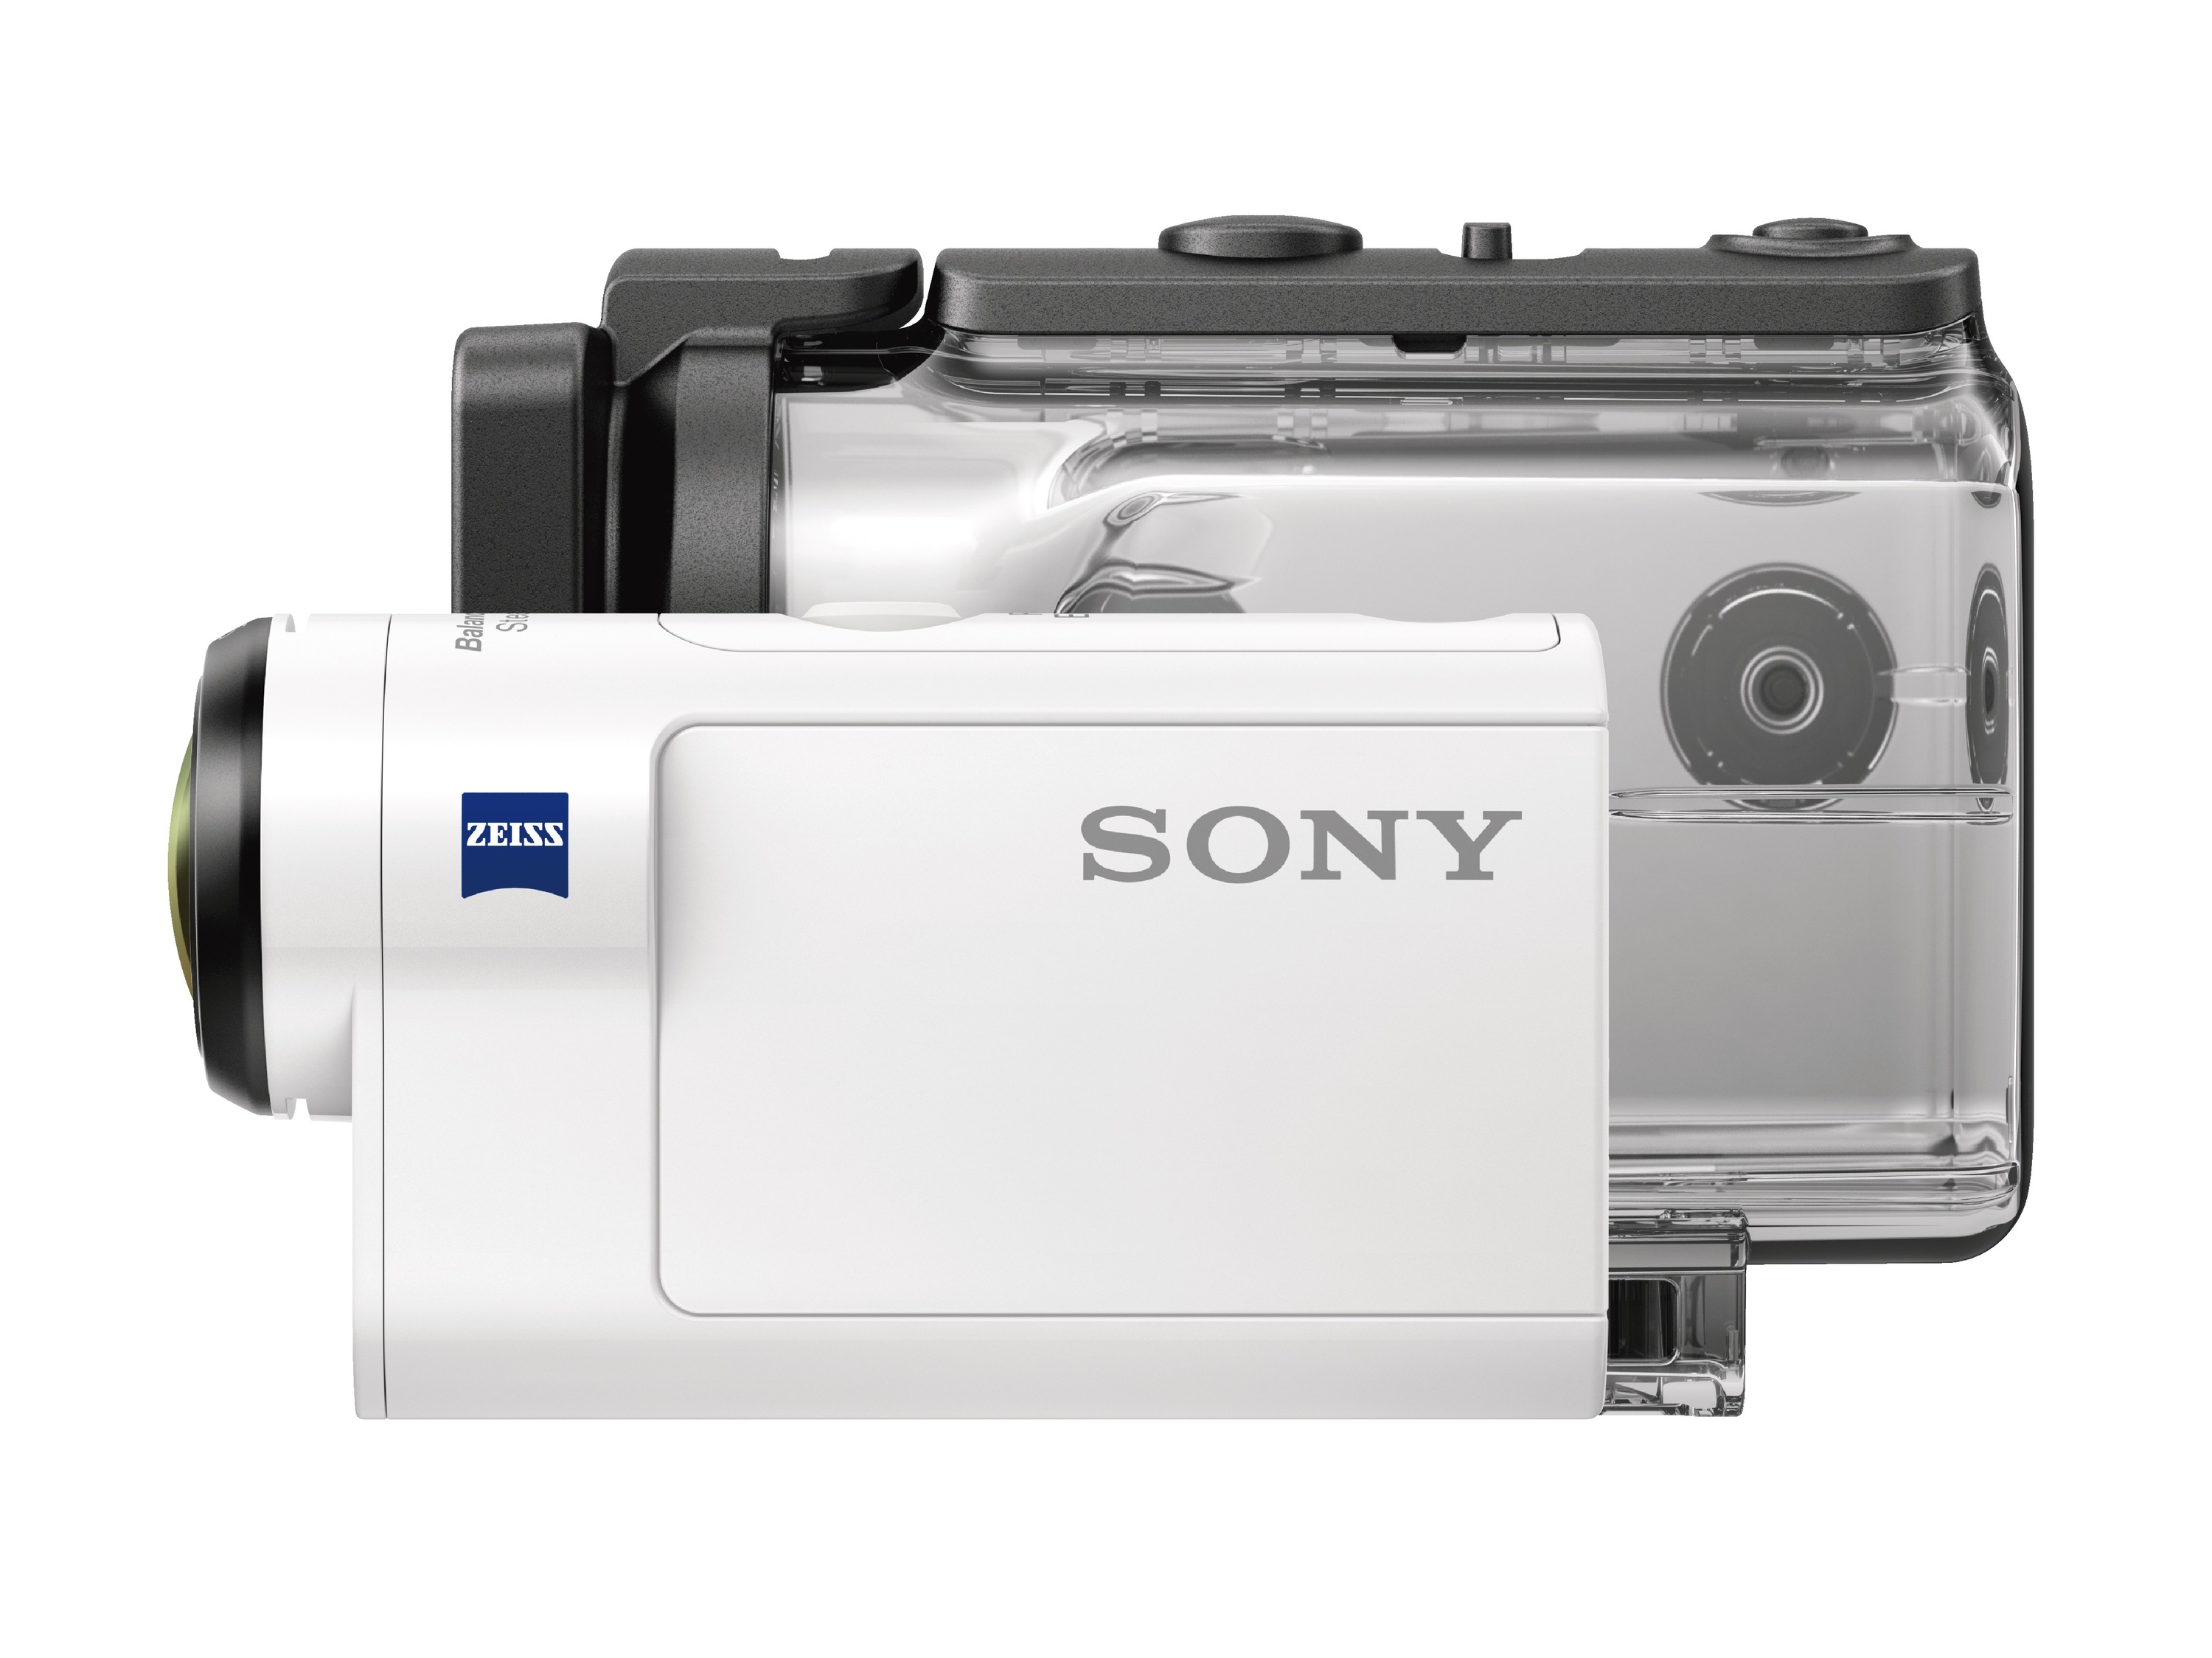  sony cam hdr-as300 action 